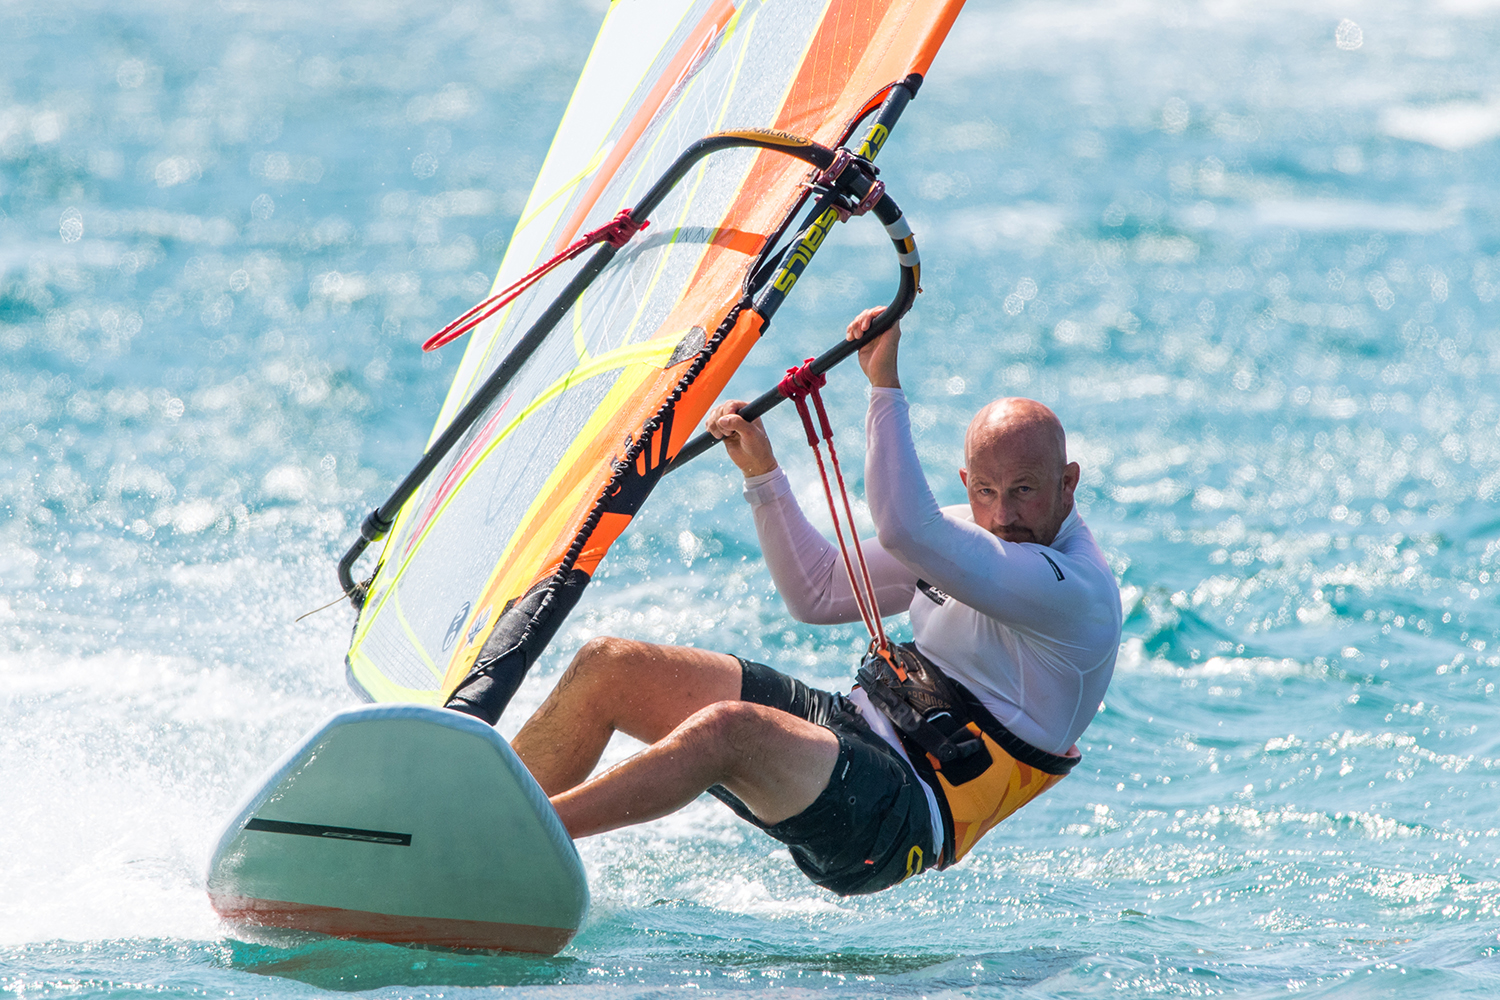 Really dropping your hips down and out will help you sheet the sail in and keep the board flat when well powered.